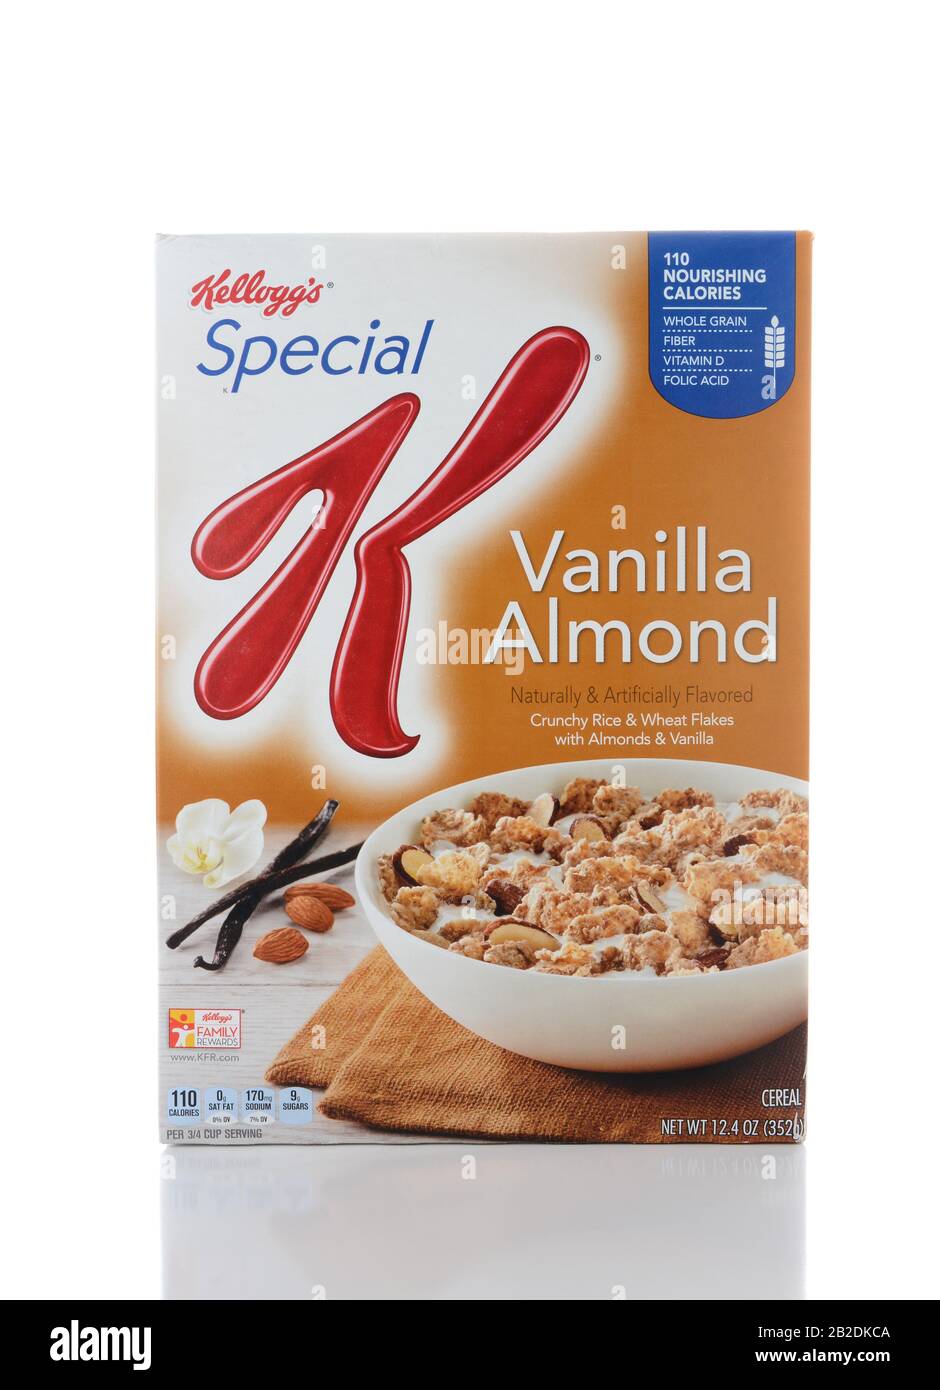 IRVINE, CA - JUNE 2, 2015: A box of Special K Vanilla Almond Cereal. Special  K cereals, from Kellogg's of Battle Creek, Michigan, are a low-fat cerea  Stock Photo - Alamy